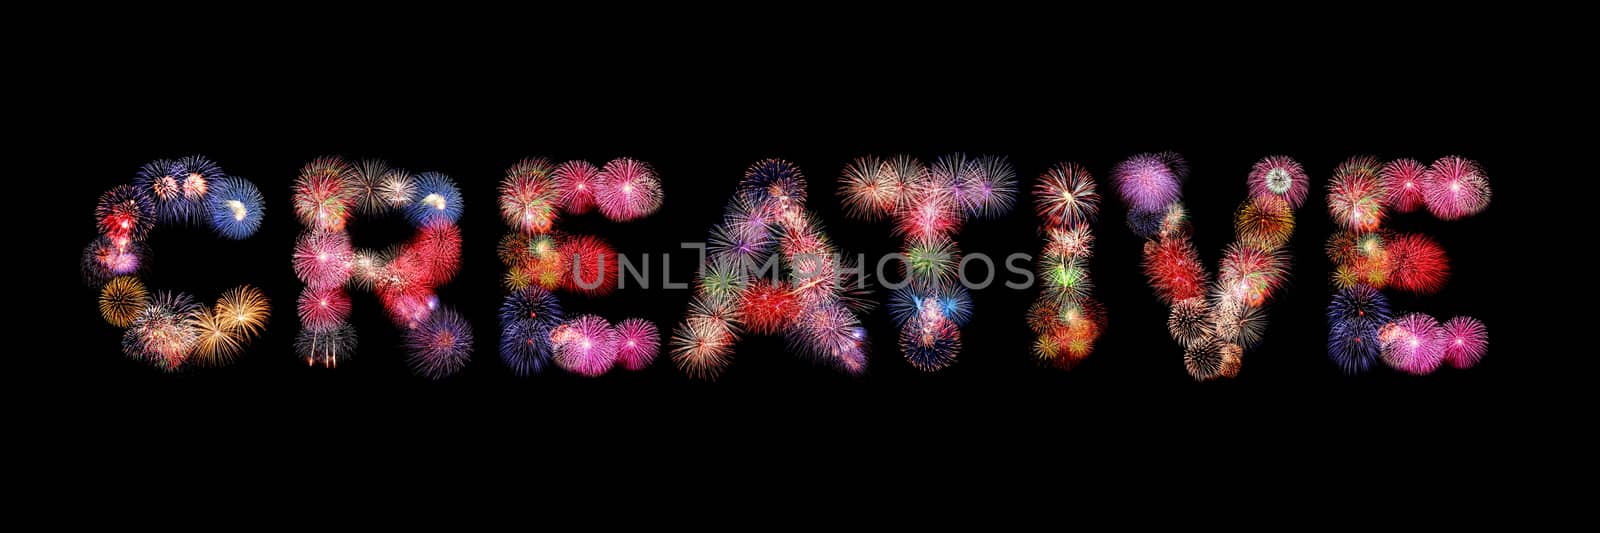 Creative text colorful fireworks by happystock